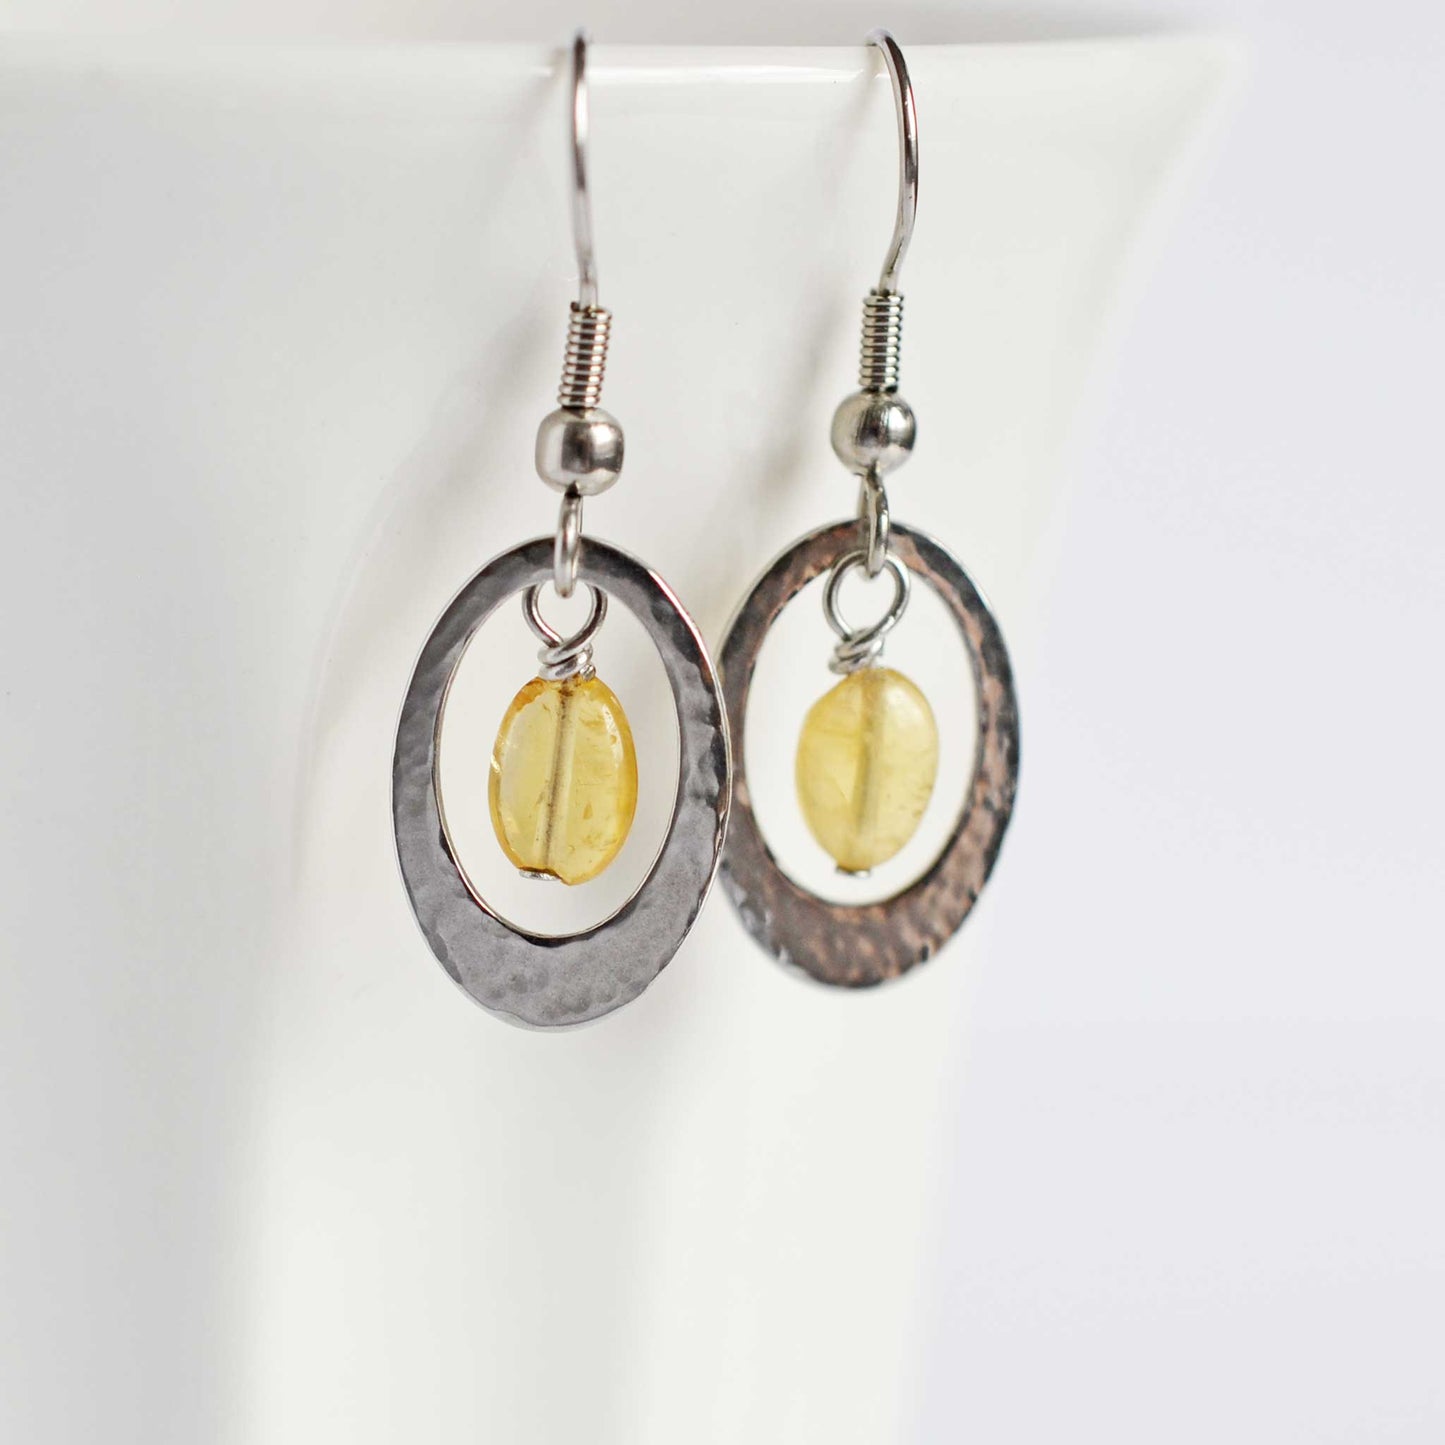 Pair of steel oval and yellow Citrine earrings hanging on white cup.